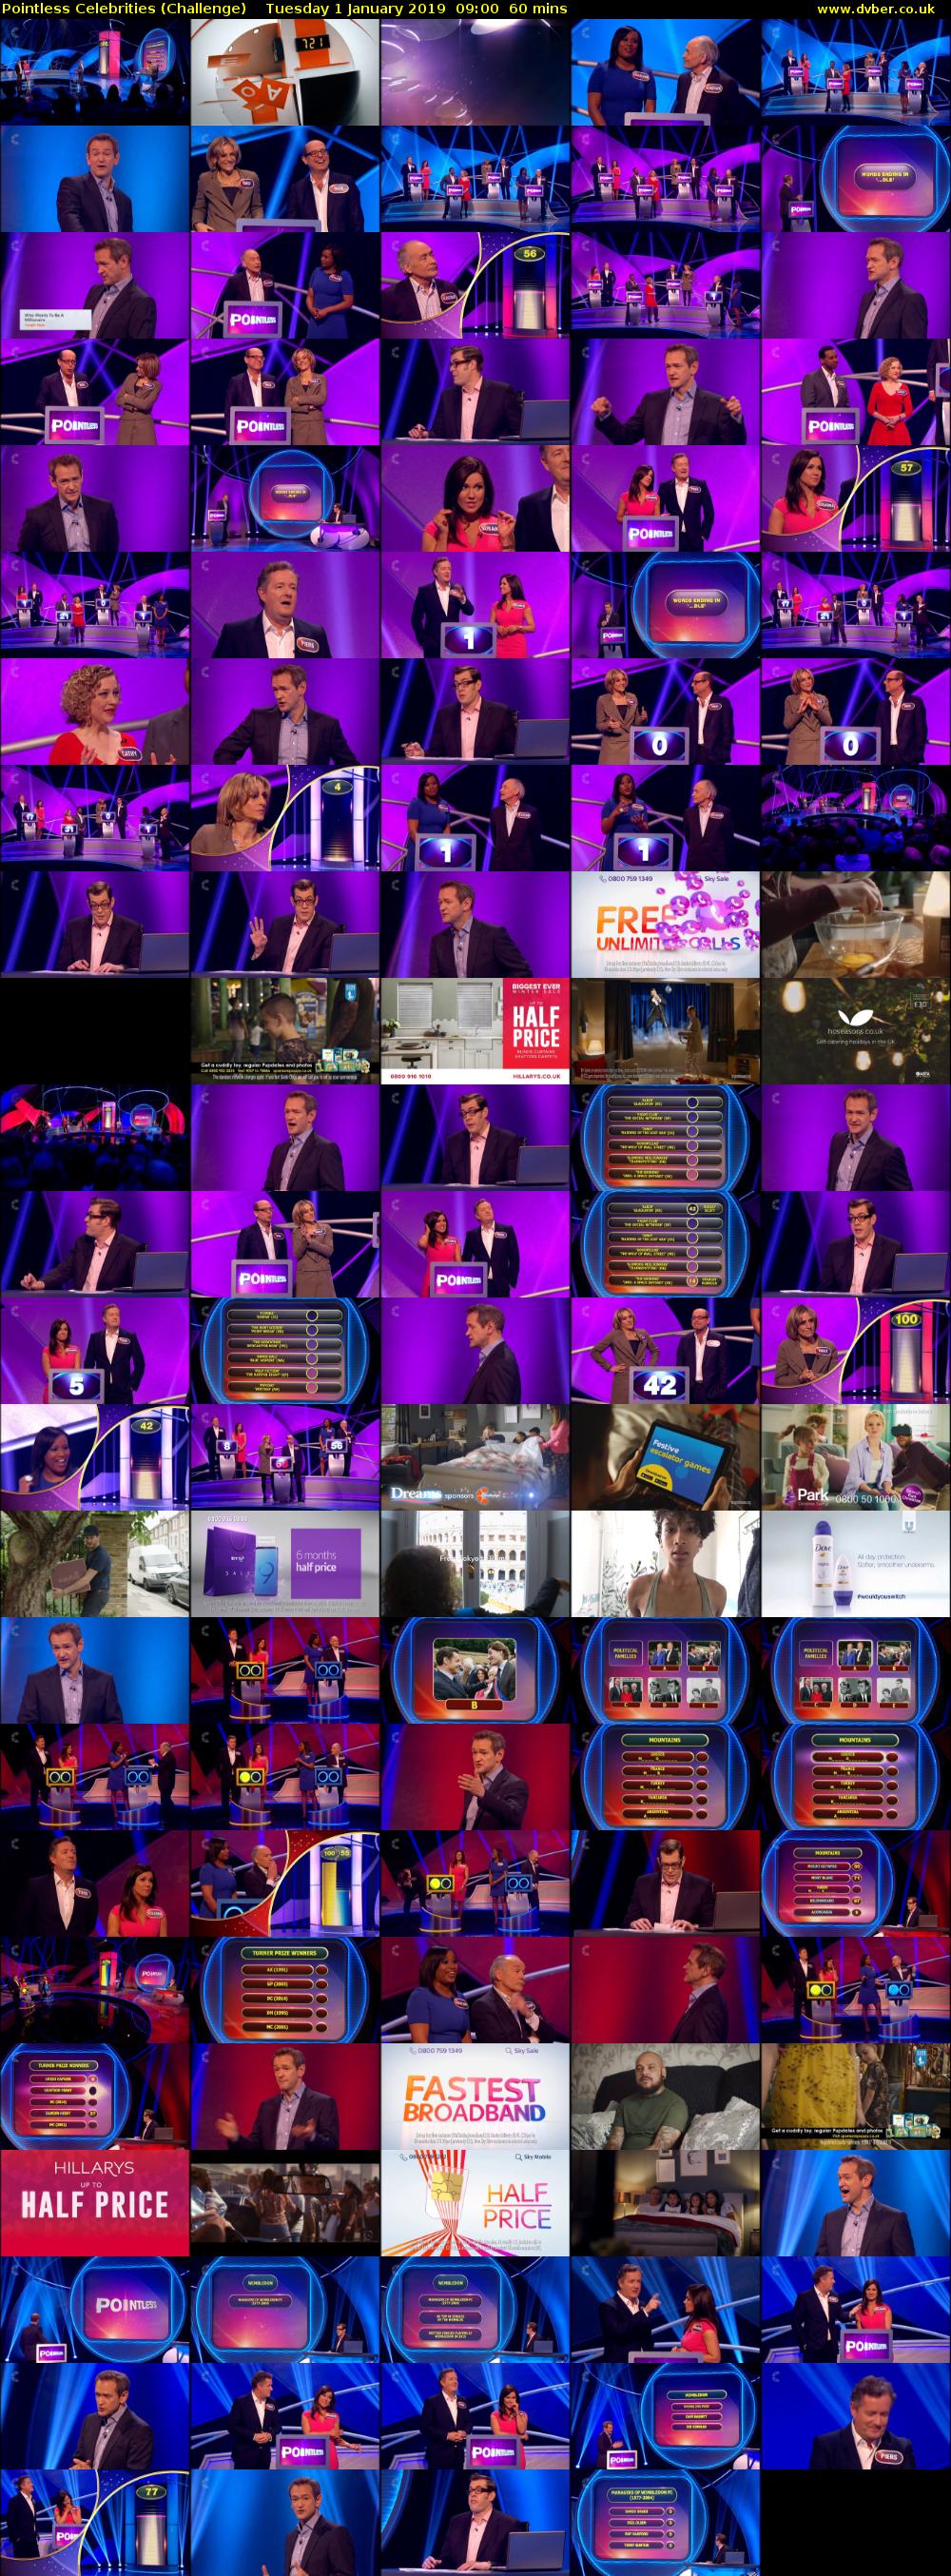 Pointless Celebrities (Challenge) Tuesday 1 January 2019 09:00 - 10:00